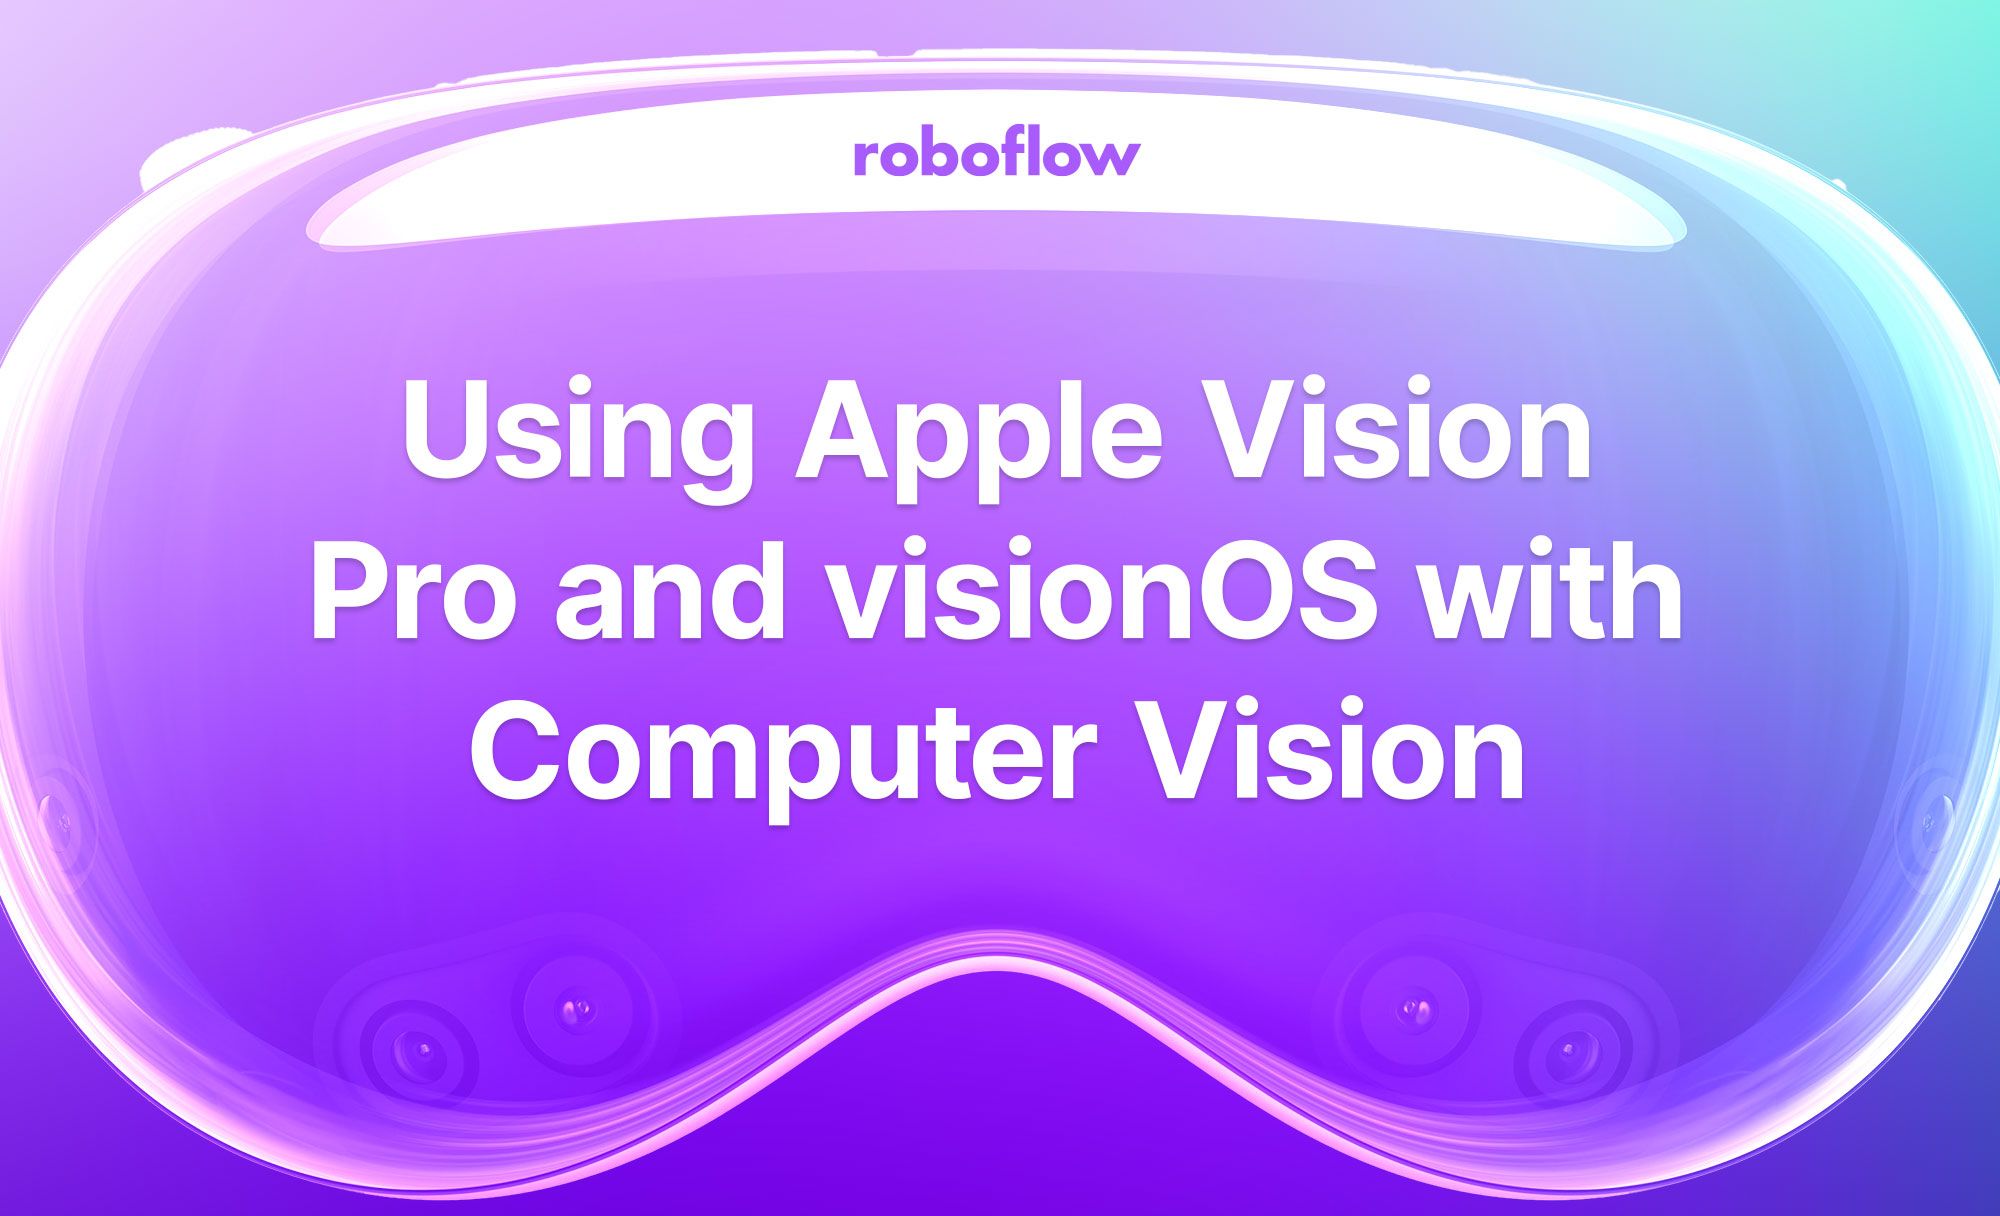 Using Apple Vision Pro and visionOS with Computer Vision